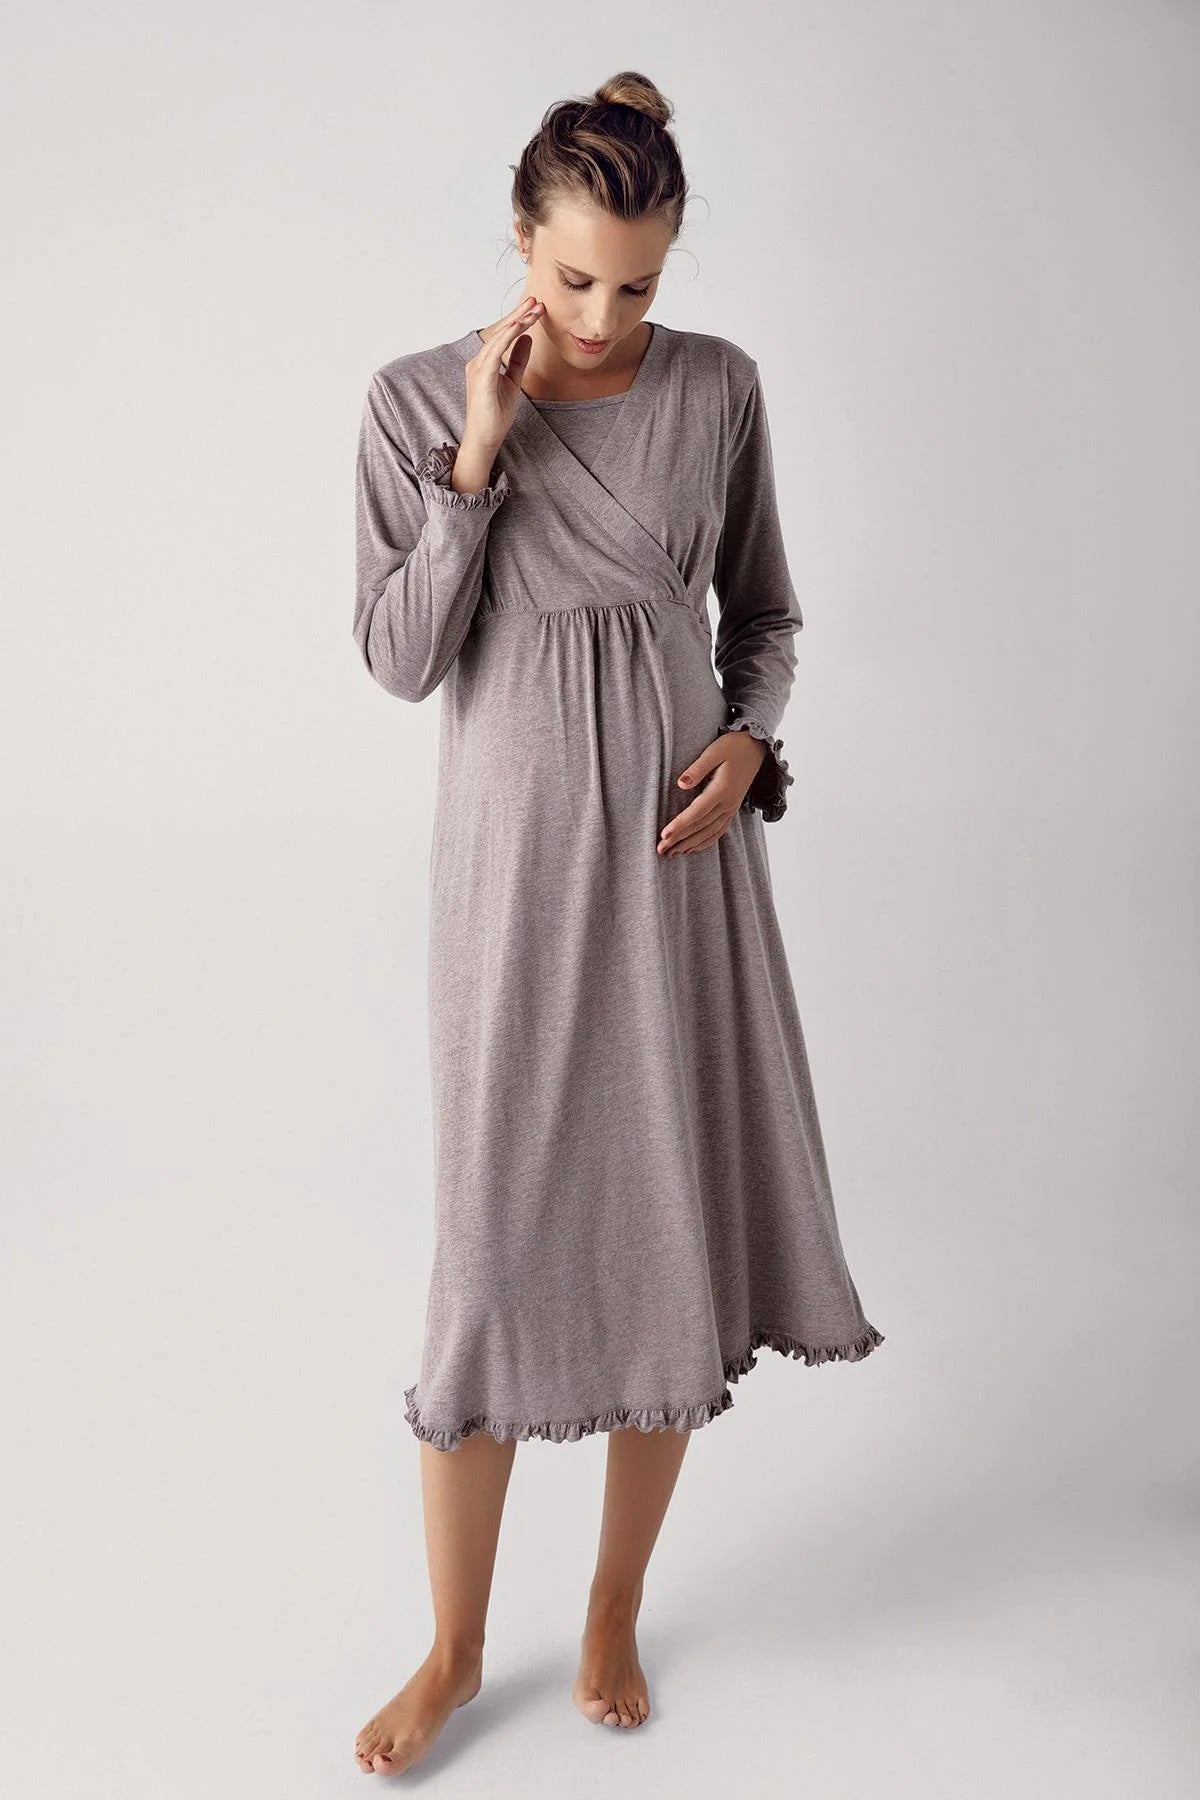 Shopymommy 13112 Double Breasted Maternity & Nursing Nightgown Coffee